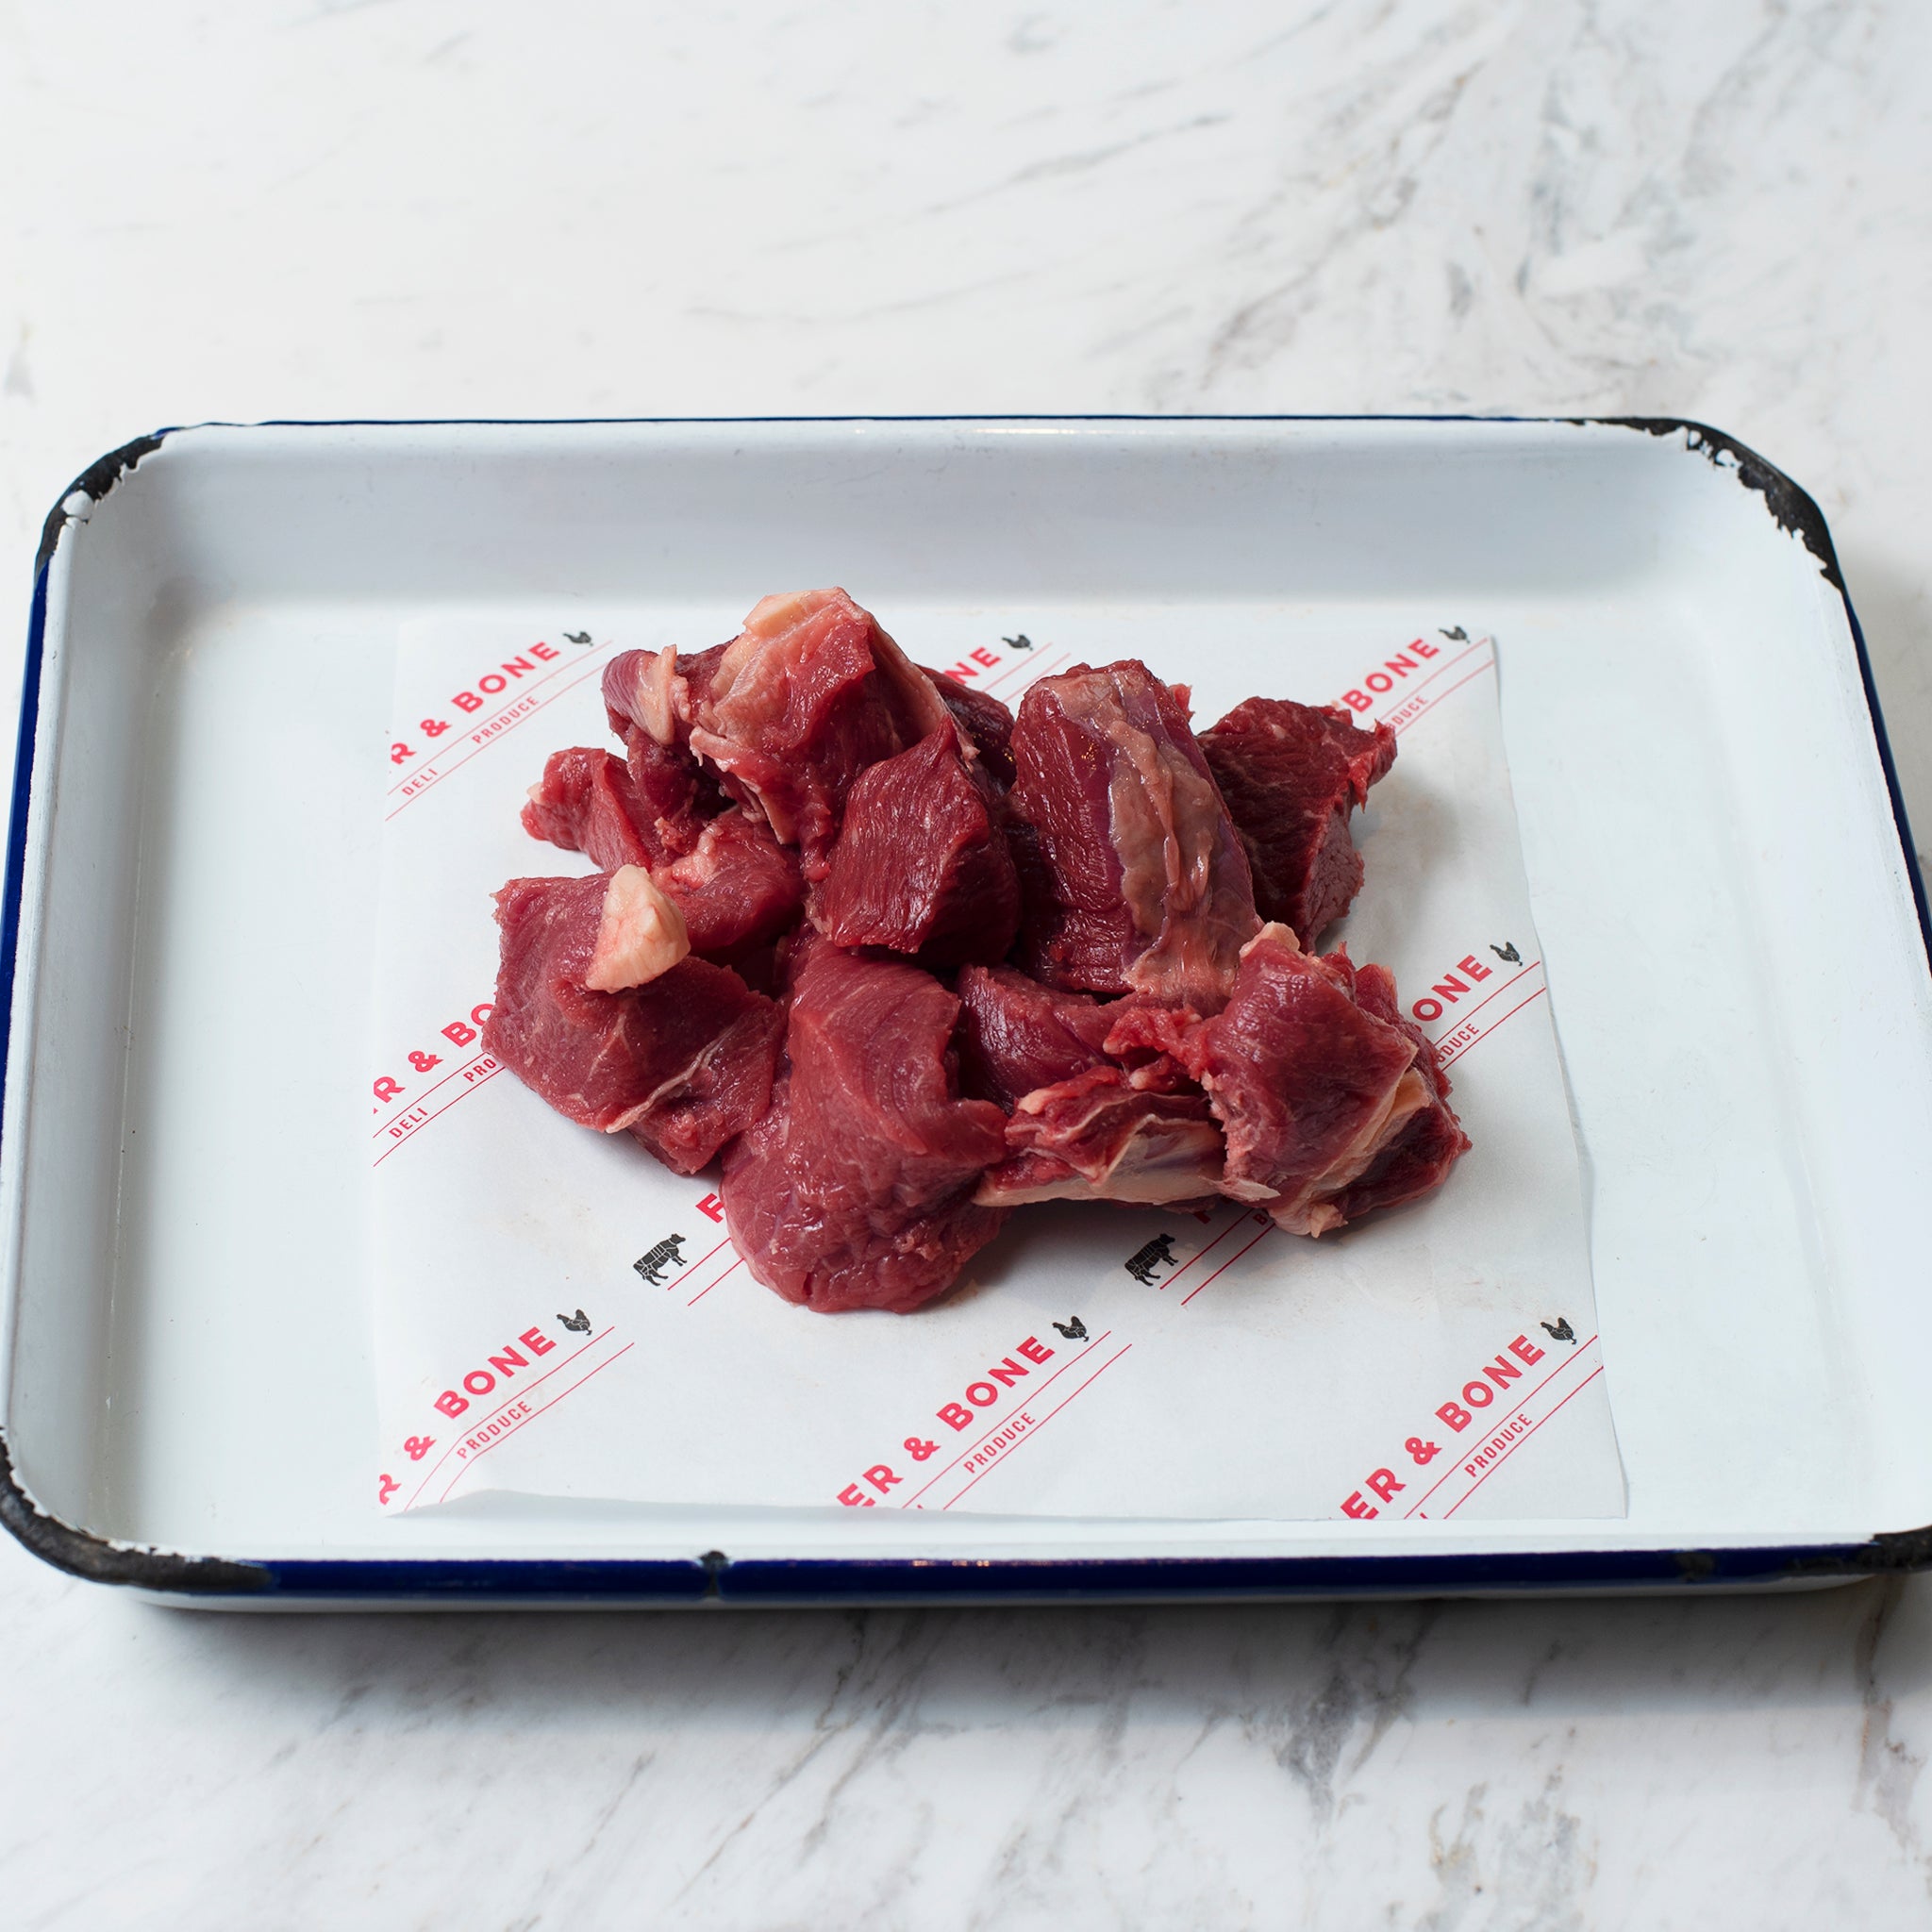 Grass Fed Diced Beef on an enamel tray.